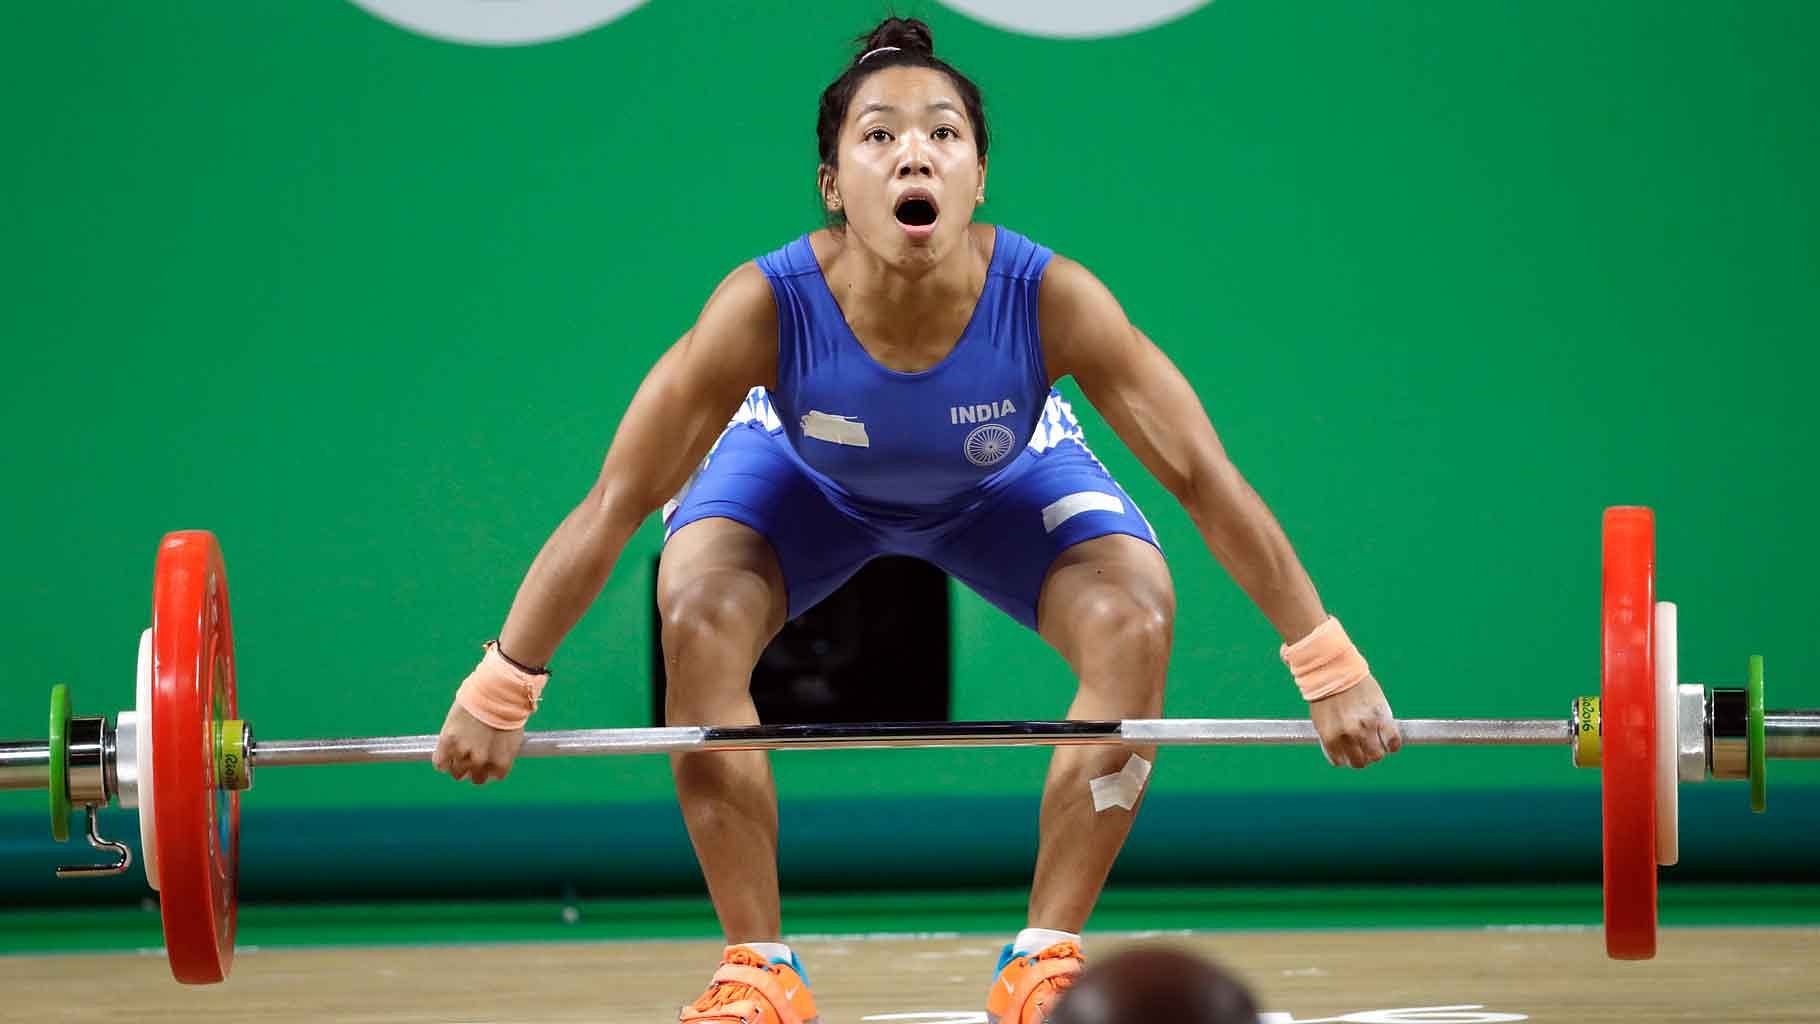 File picture of Indian weightlifter Saikhom Mirabai Chanu in action at the Rio Olympics in 2016.